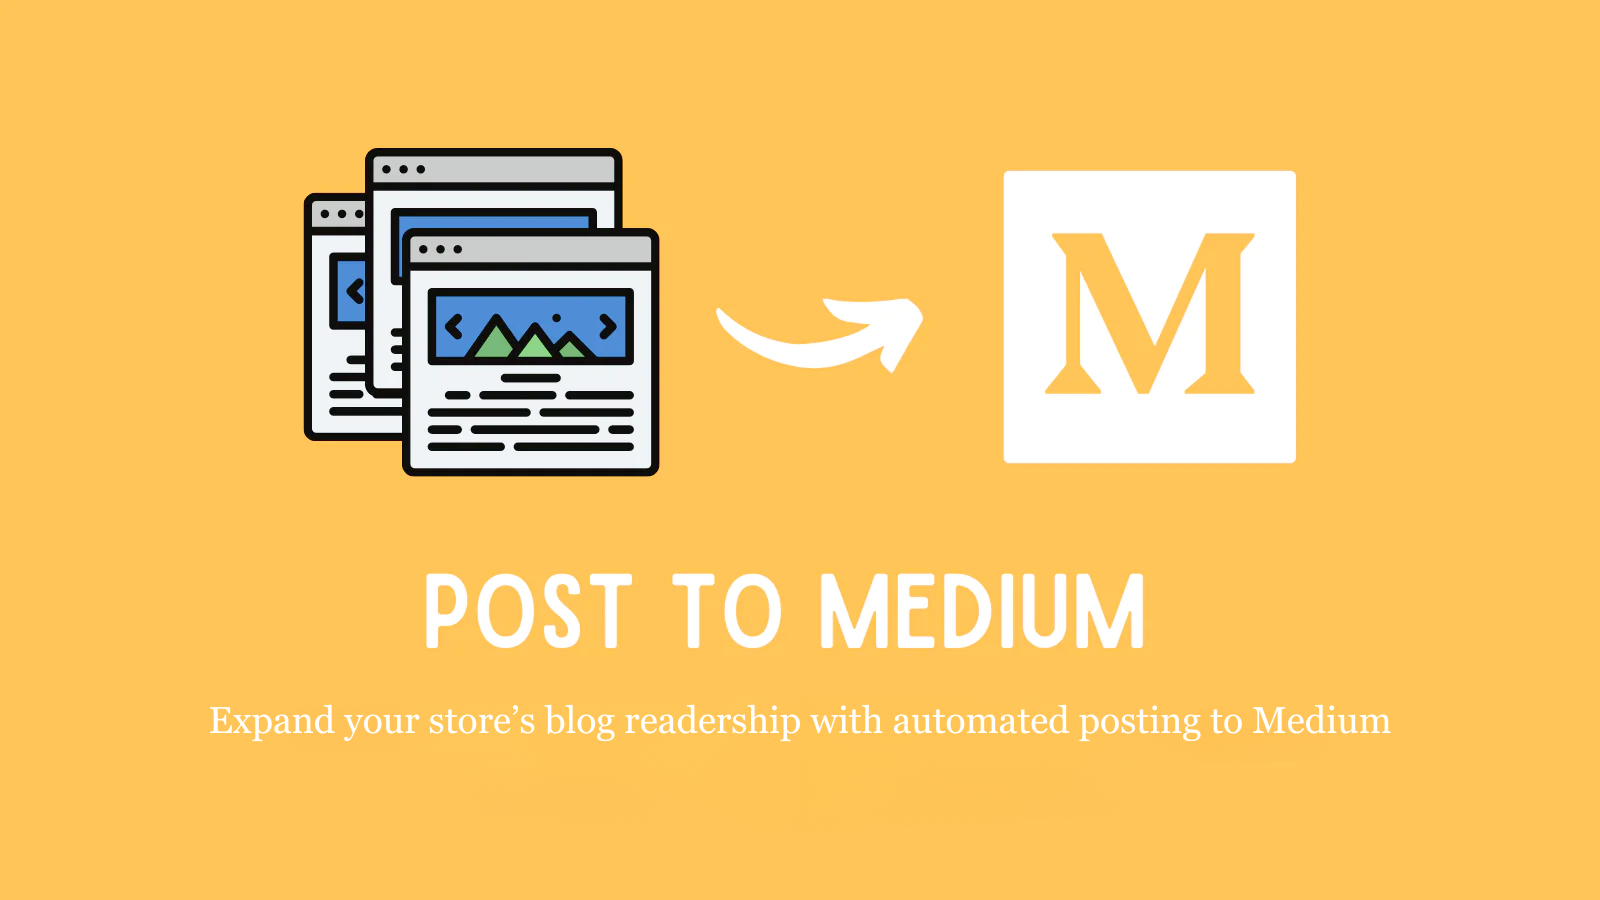 An easy way to expand your blog readership with Medium posts